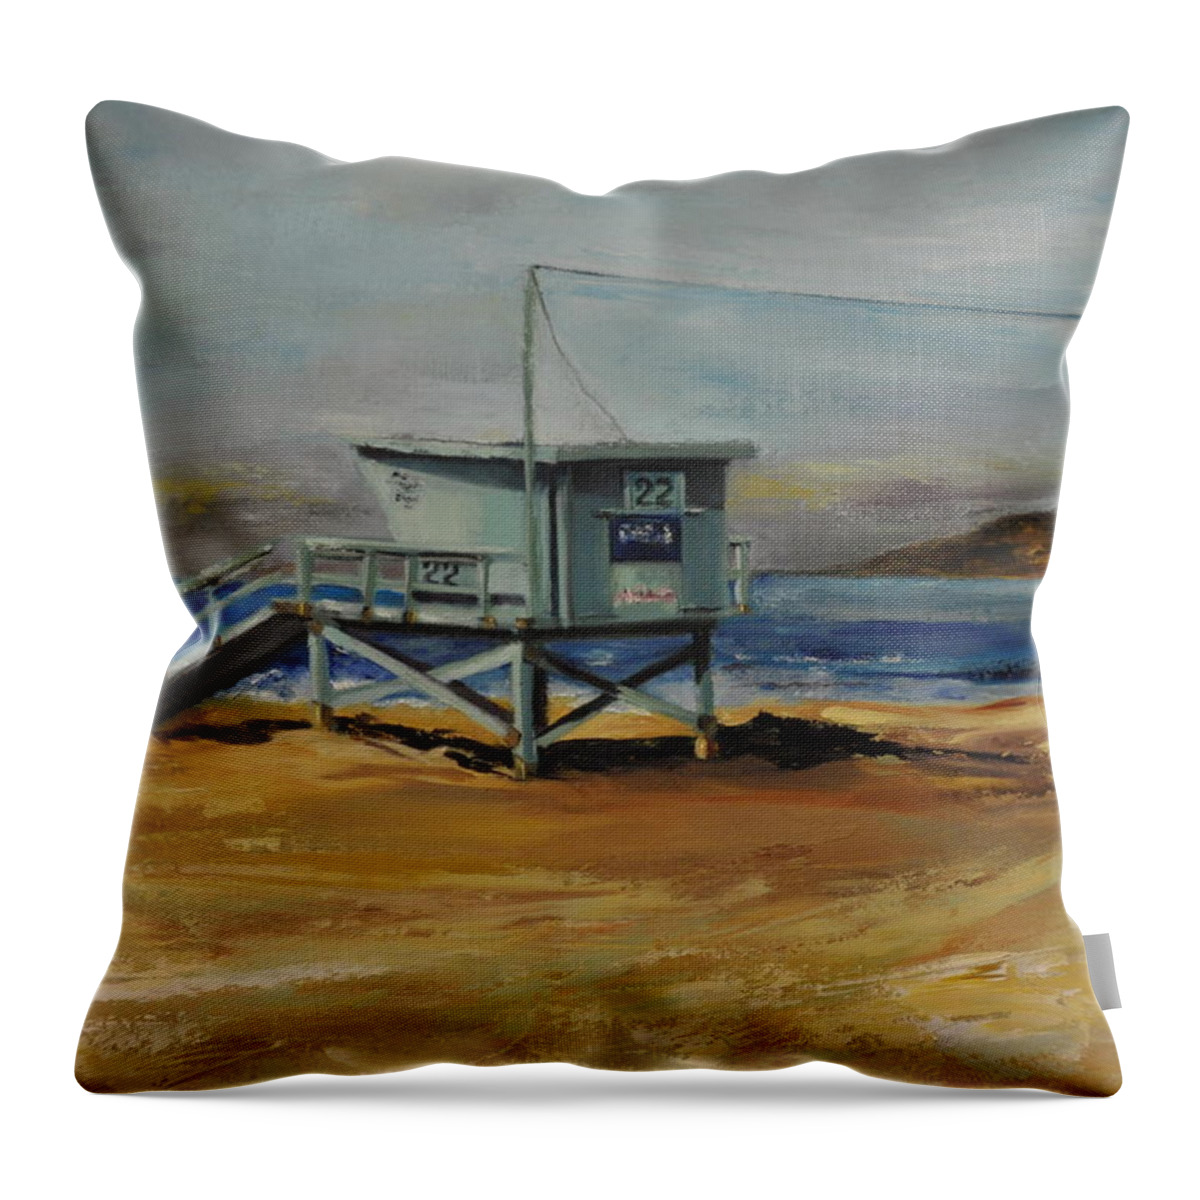 Lifeguard Throw Pillow featuring the painting Lifeguard Station Twenty Two by Lindsay Frost